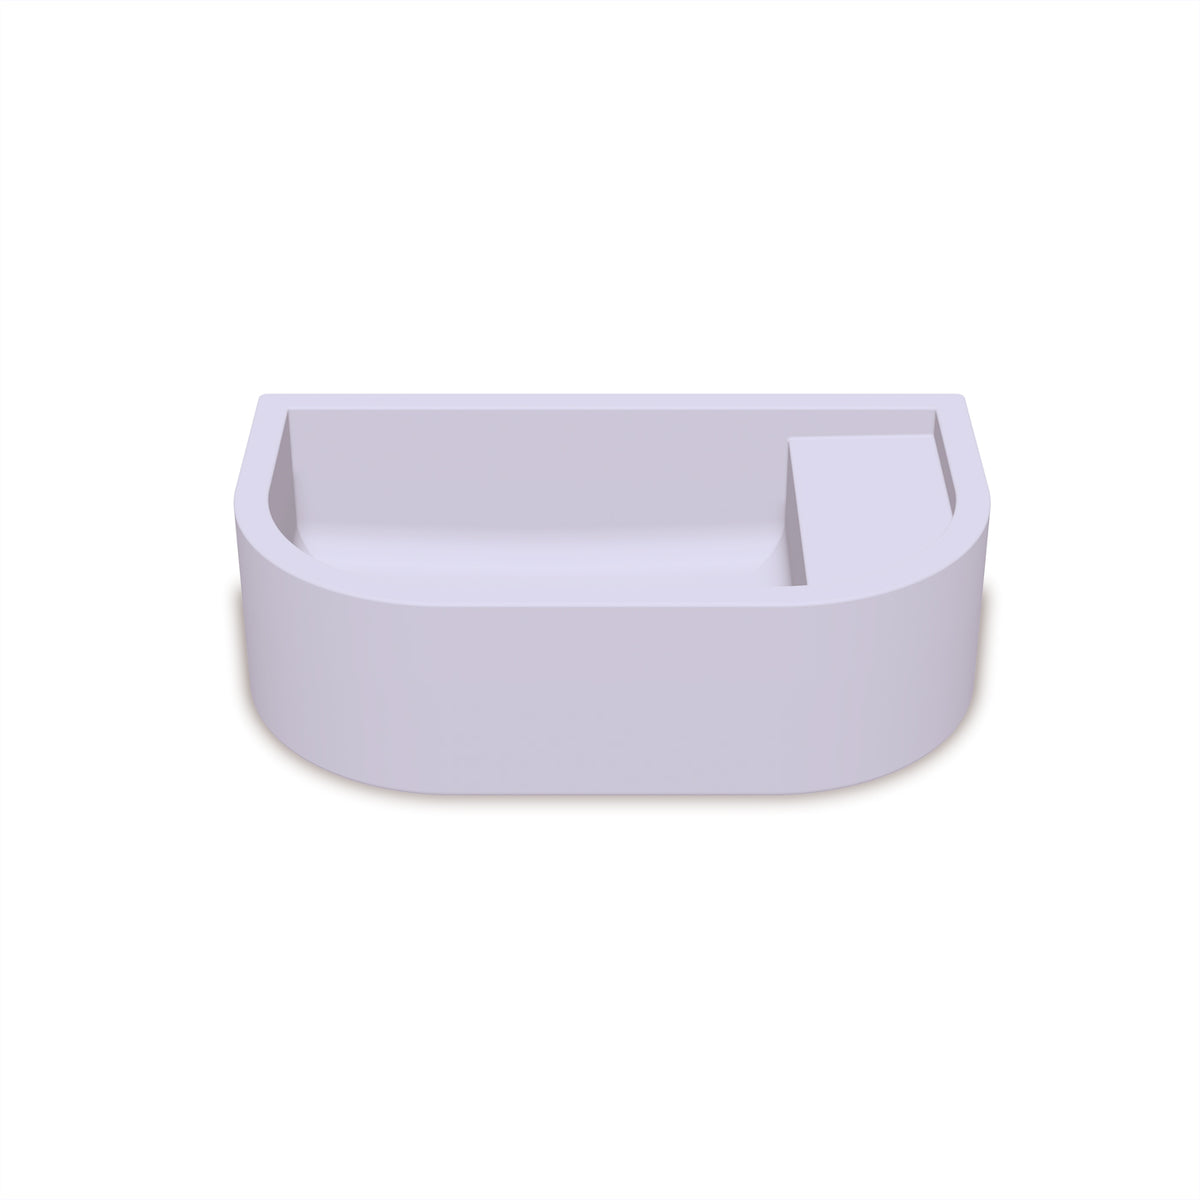 Loop 01 Basin - Overflow - Surface Mount (Lilac,No Tap Hole,Chrome)